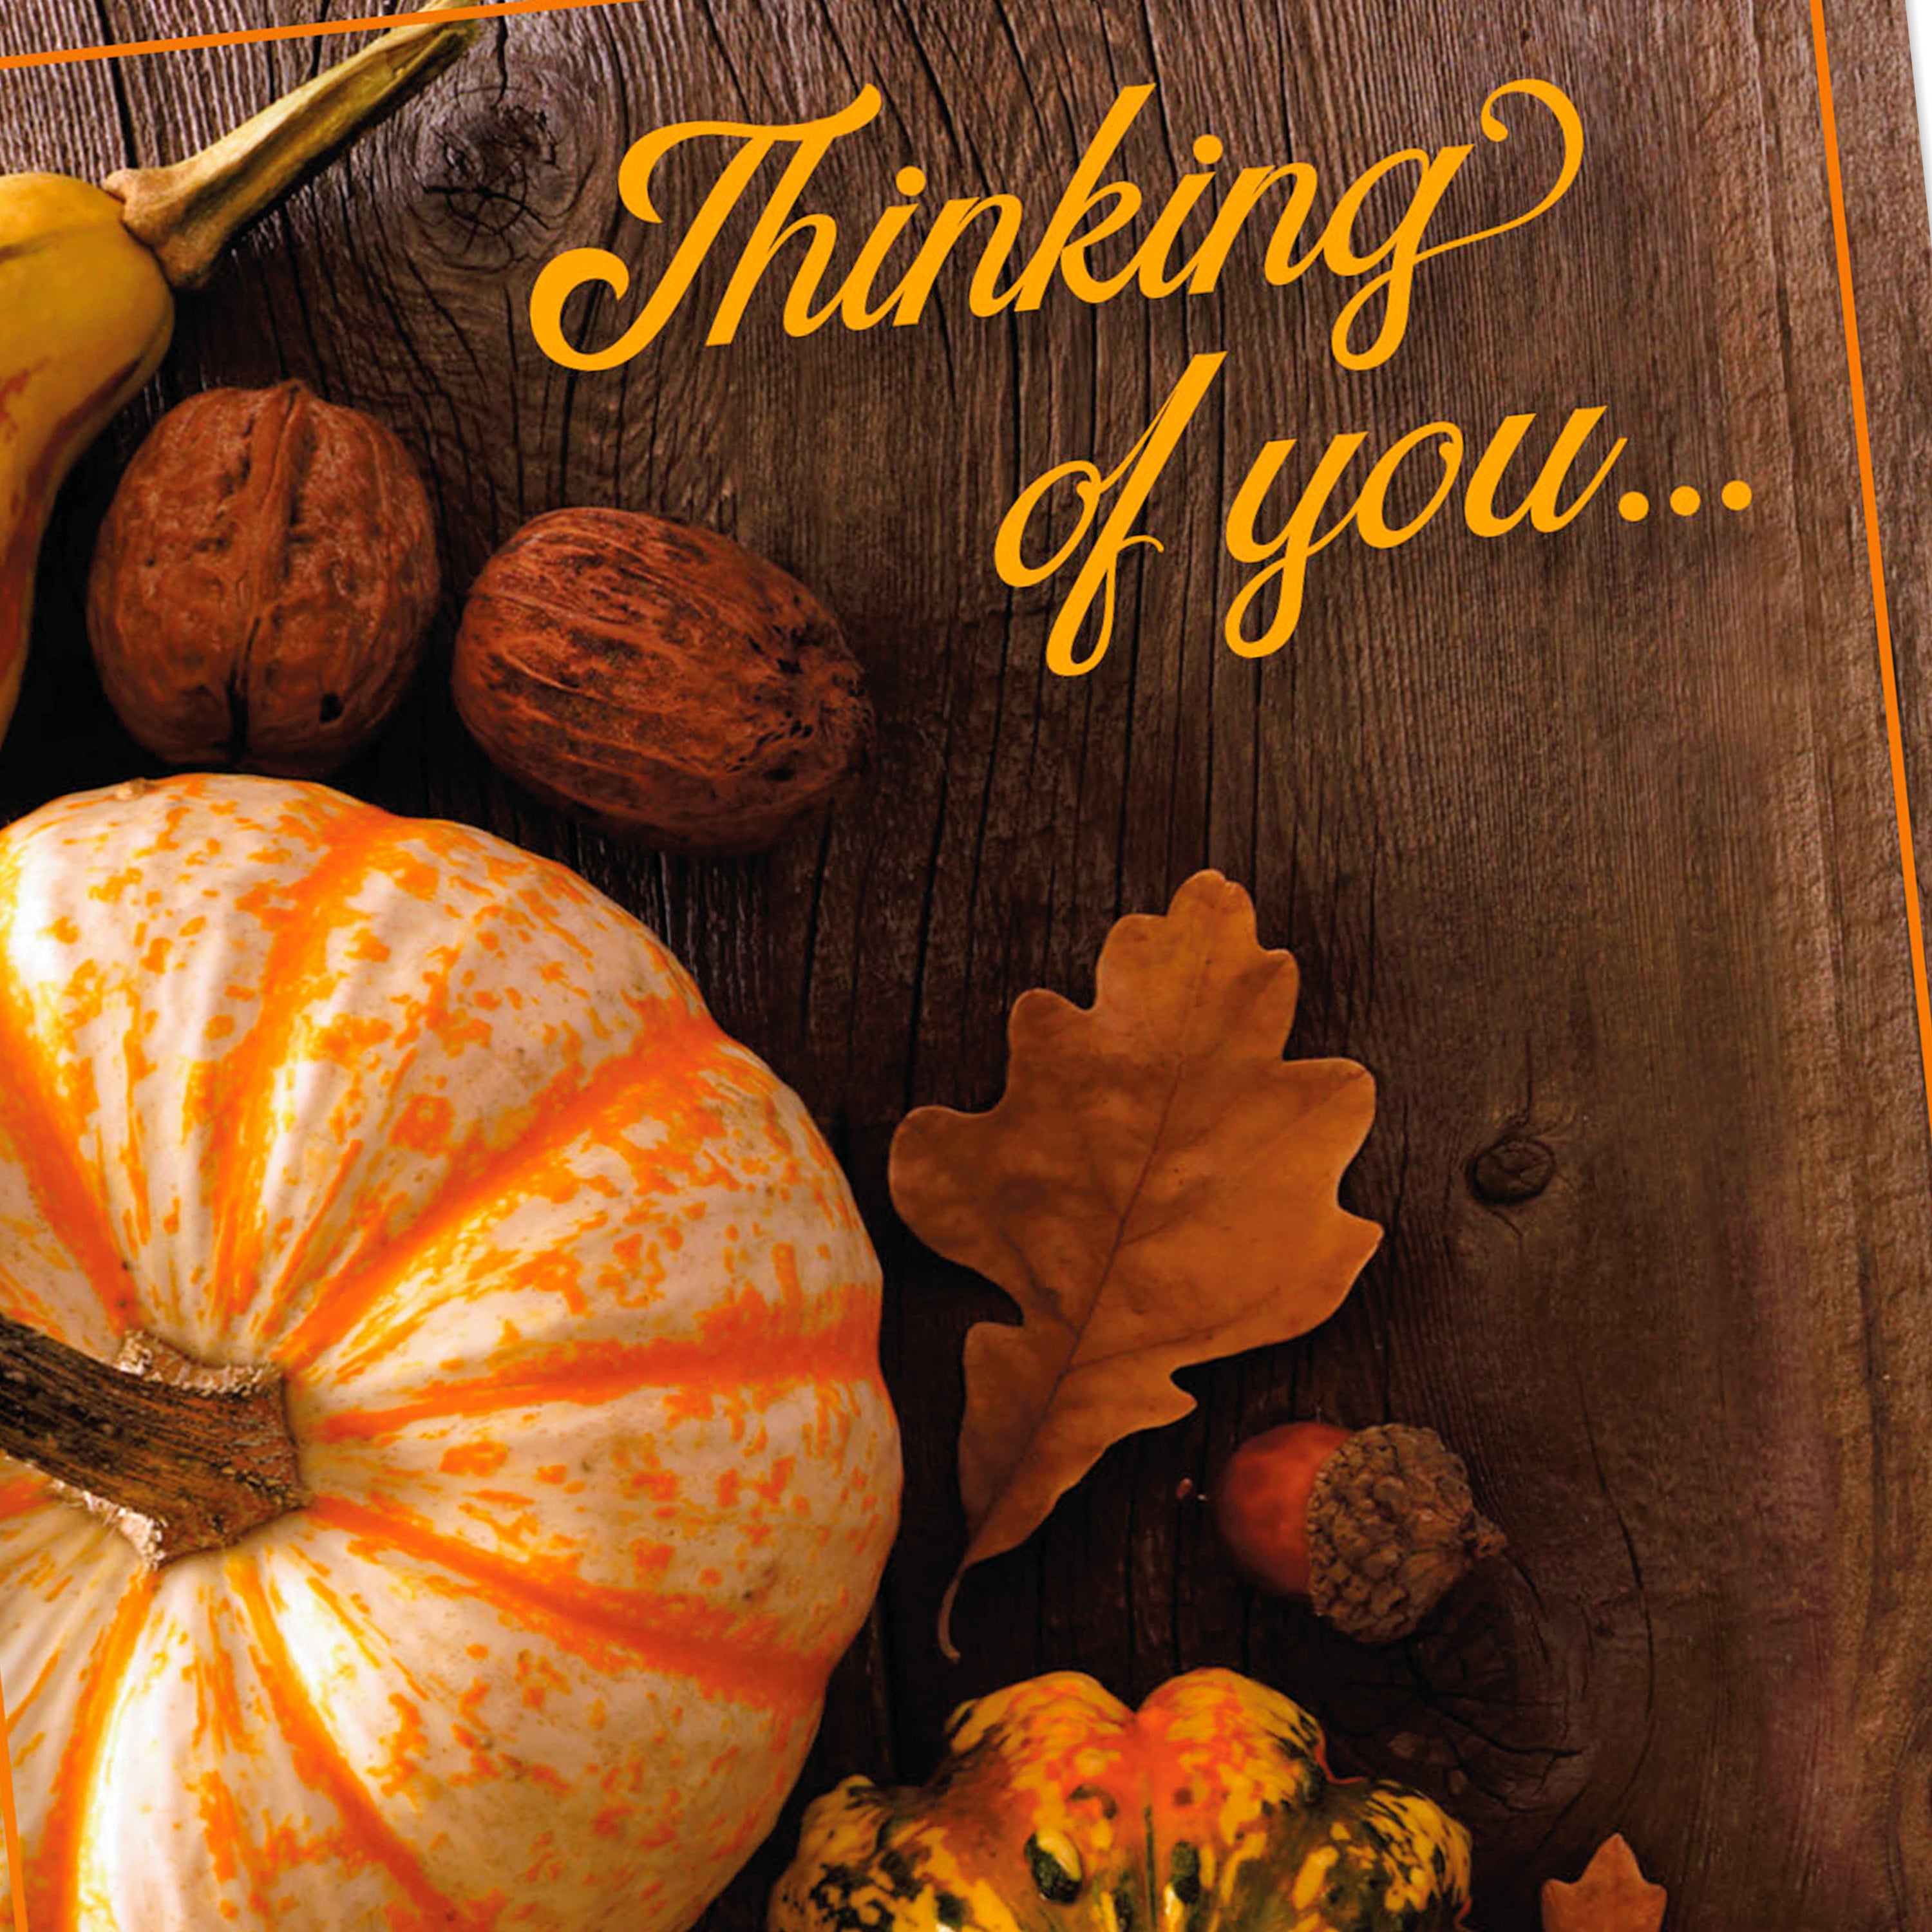 Hallmark Fall Thinking of You Cards (8 Cards with Envelopes) Pumpkins and Leaves